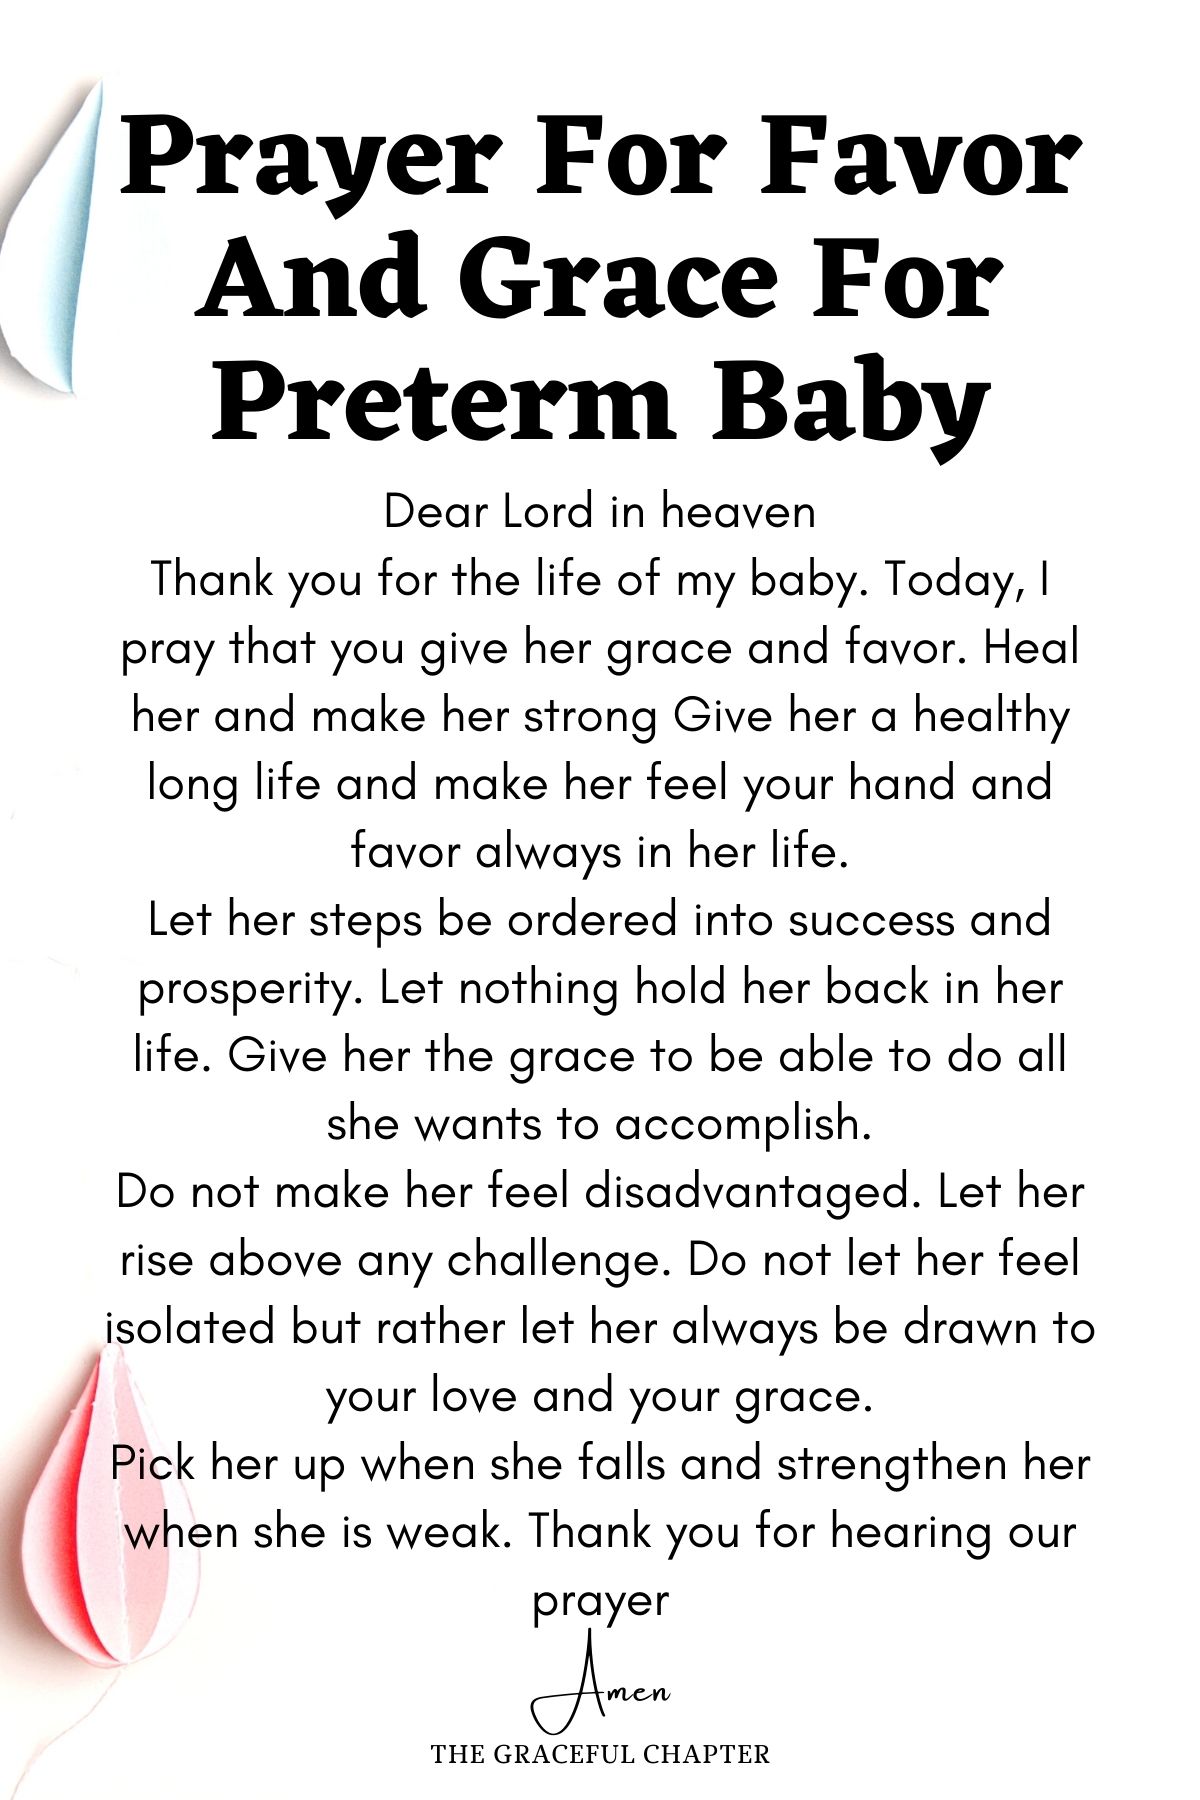 Prayer for favor and grace for preterm baby